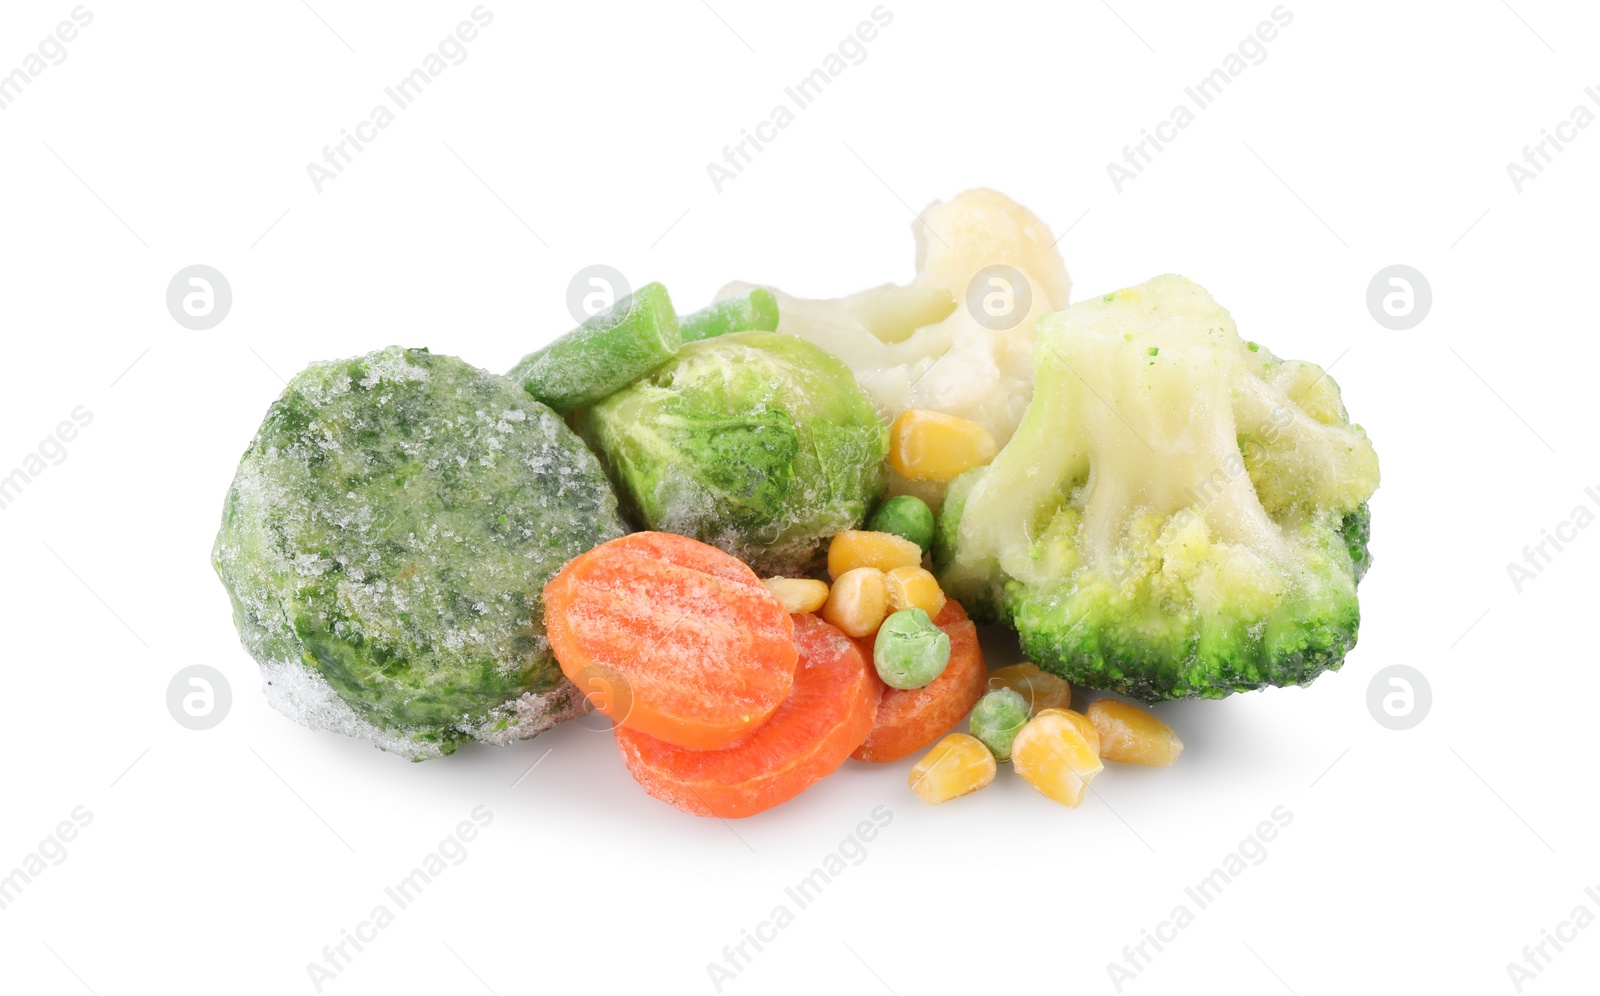 Photo of Mix of different frozen vegetables isolated on white